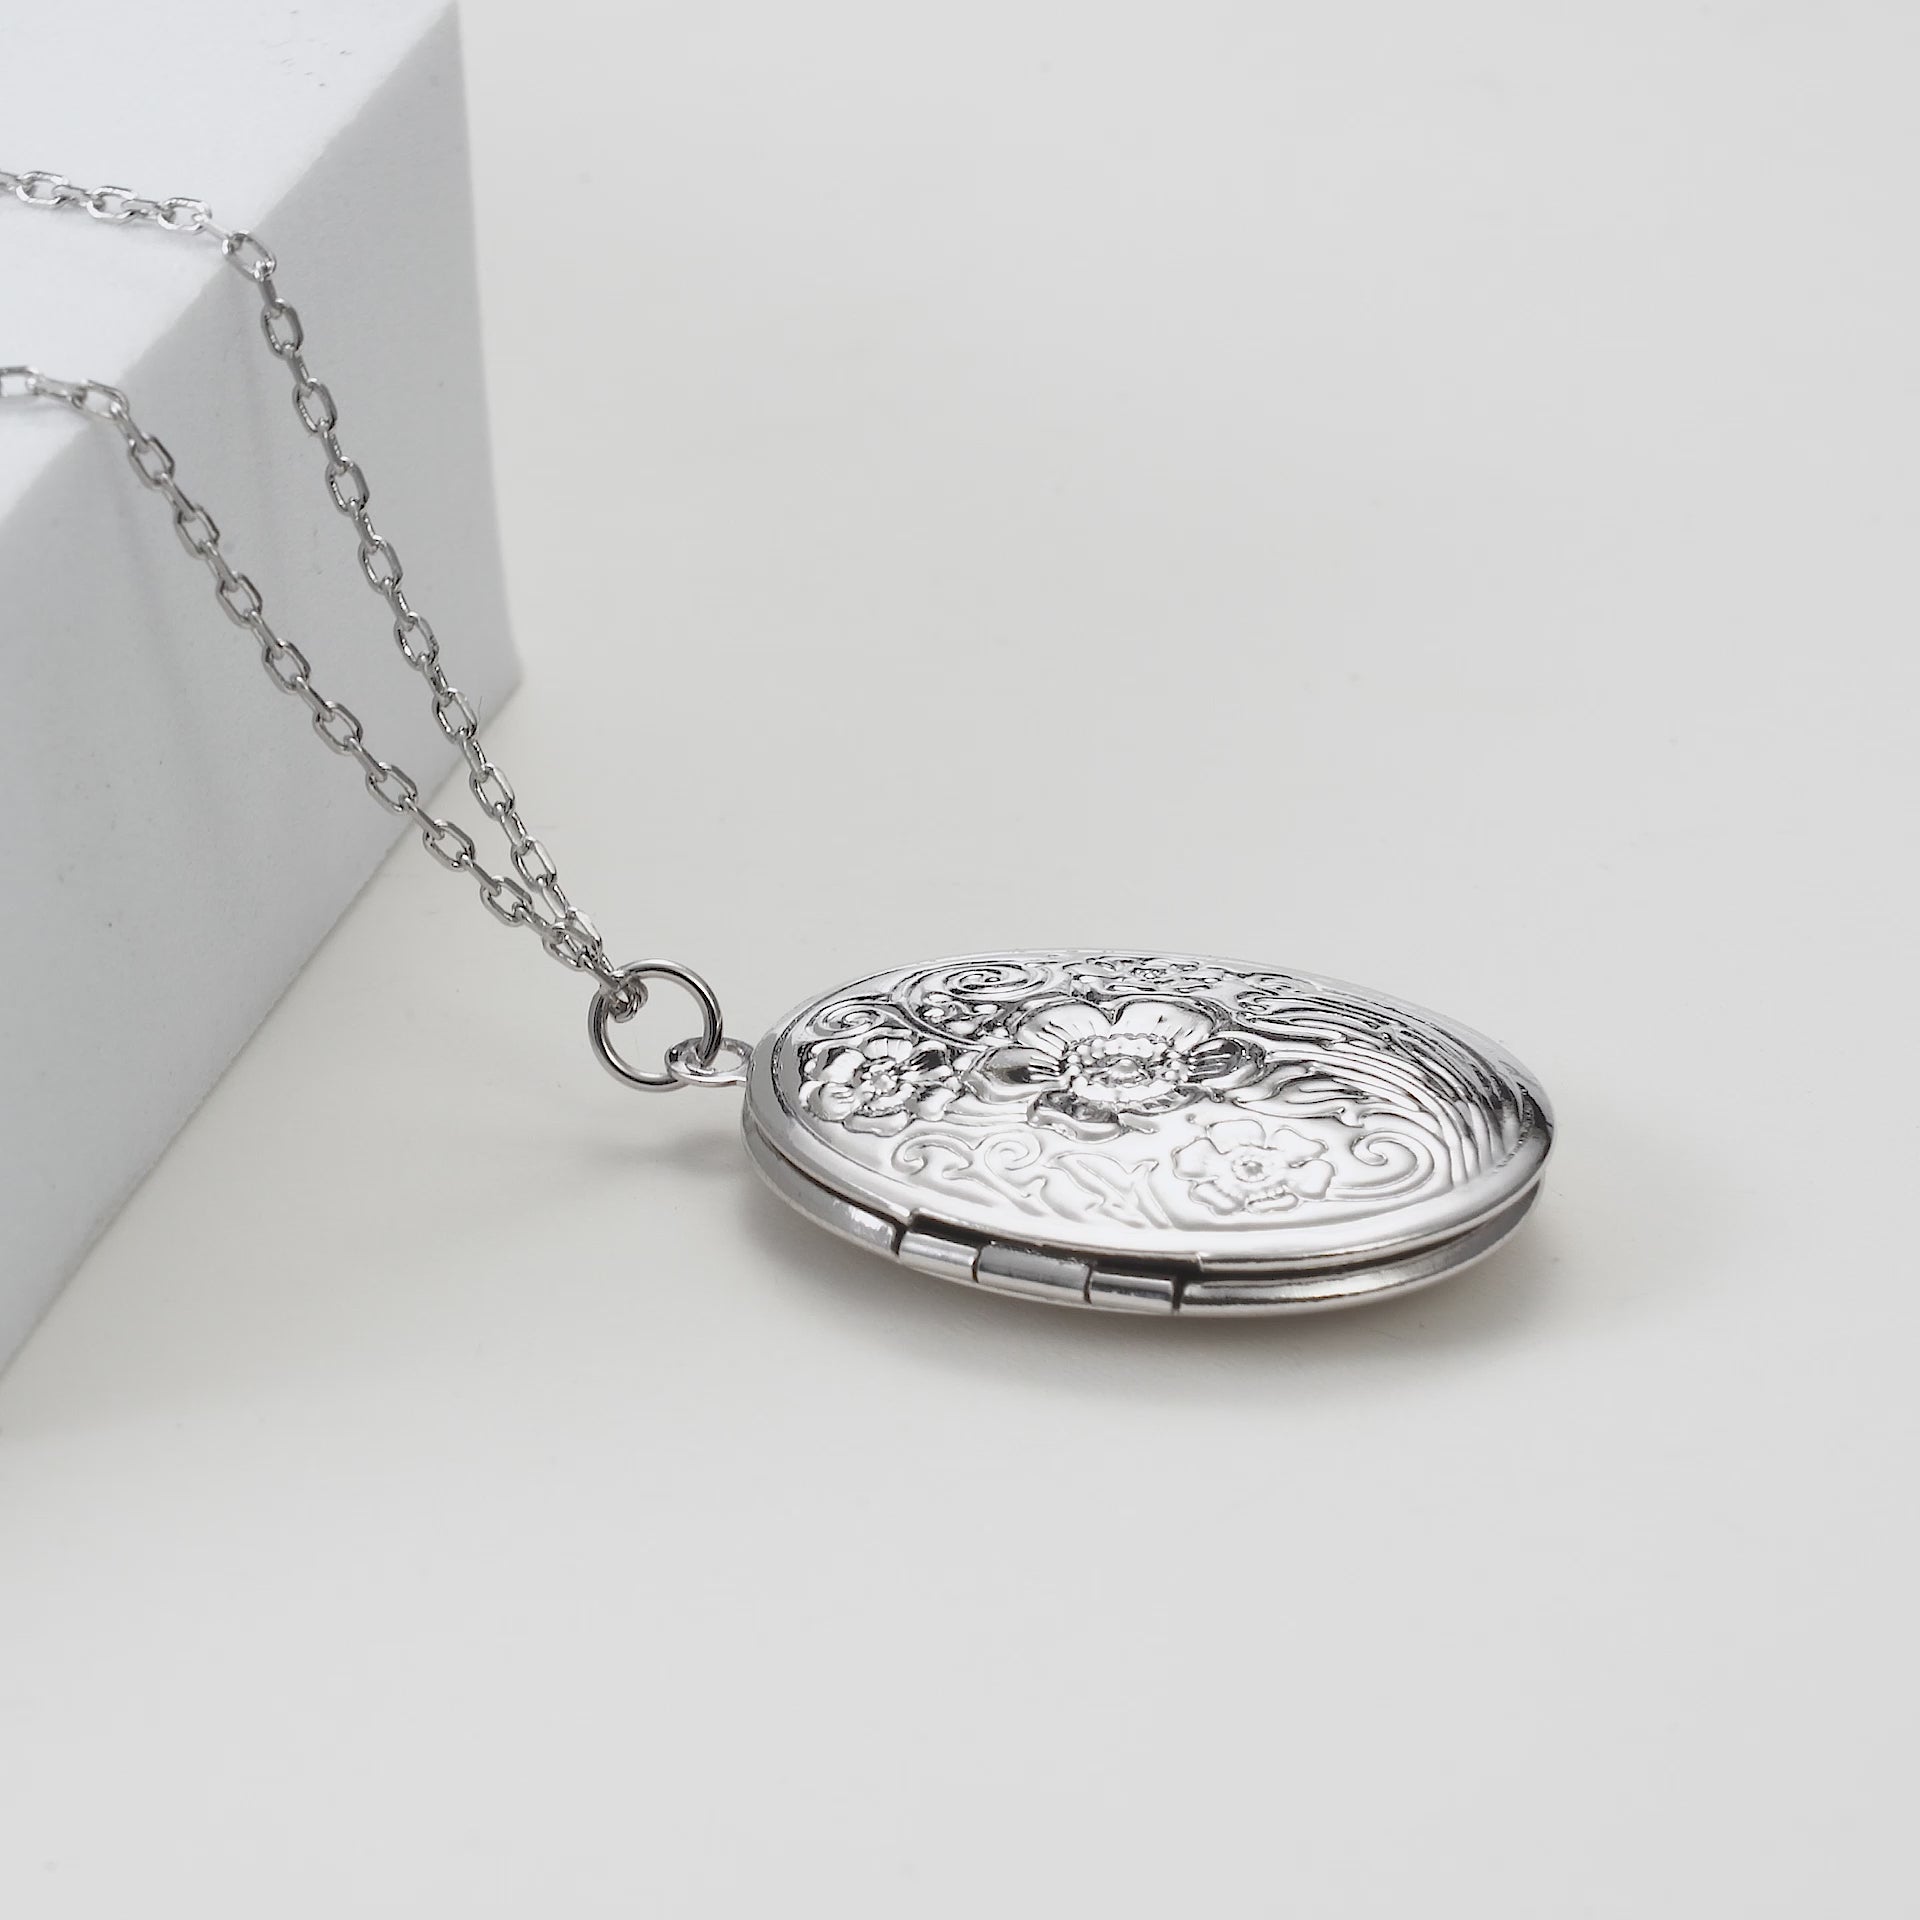 Silver Plated Oval Locket Video